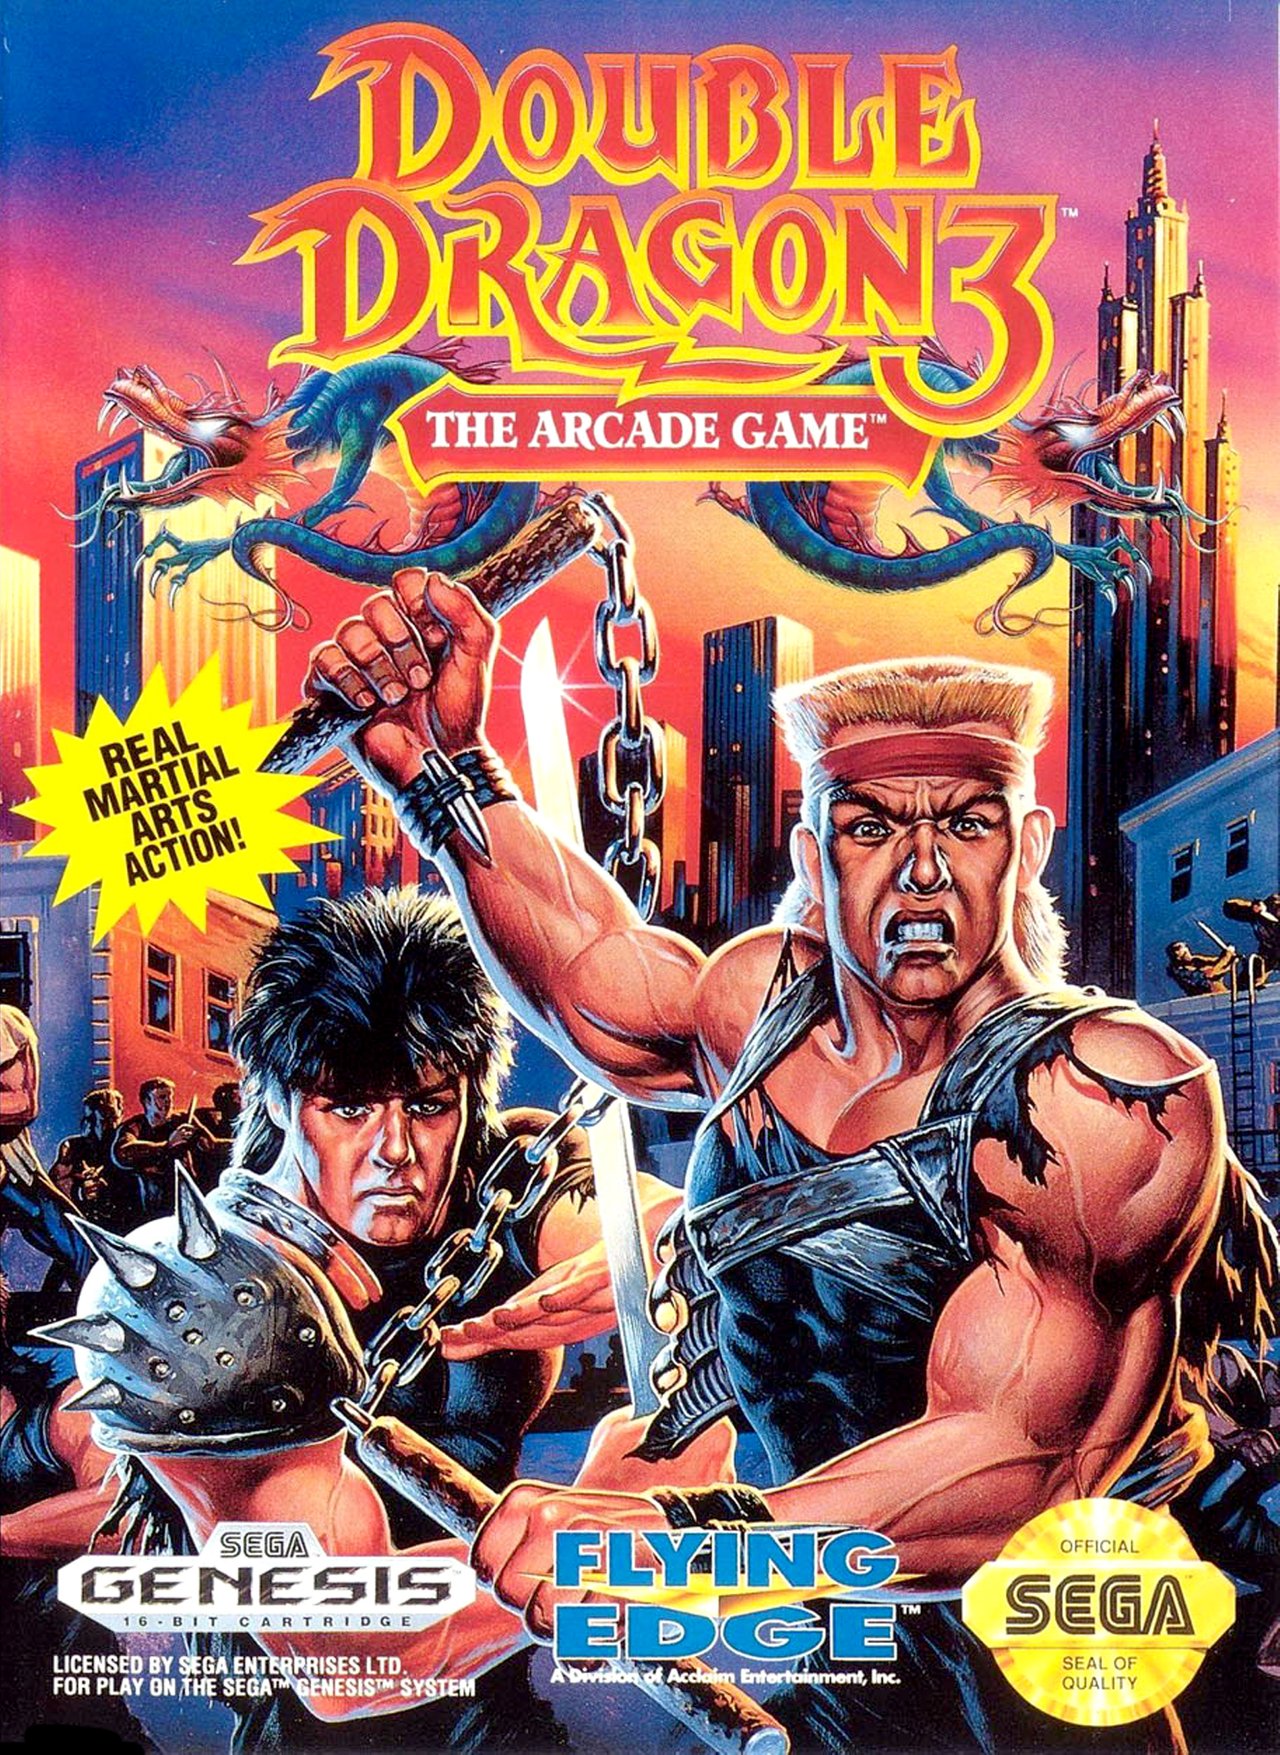 Double Dragon II: The Revenge (NES, 1990) Video Game Music Review